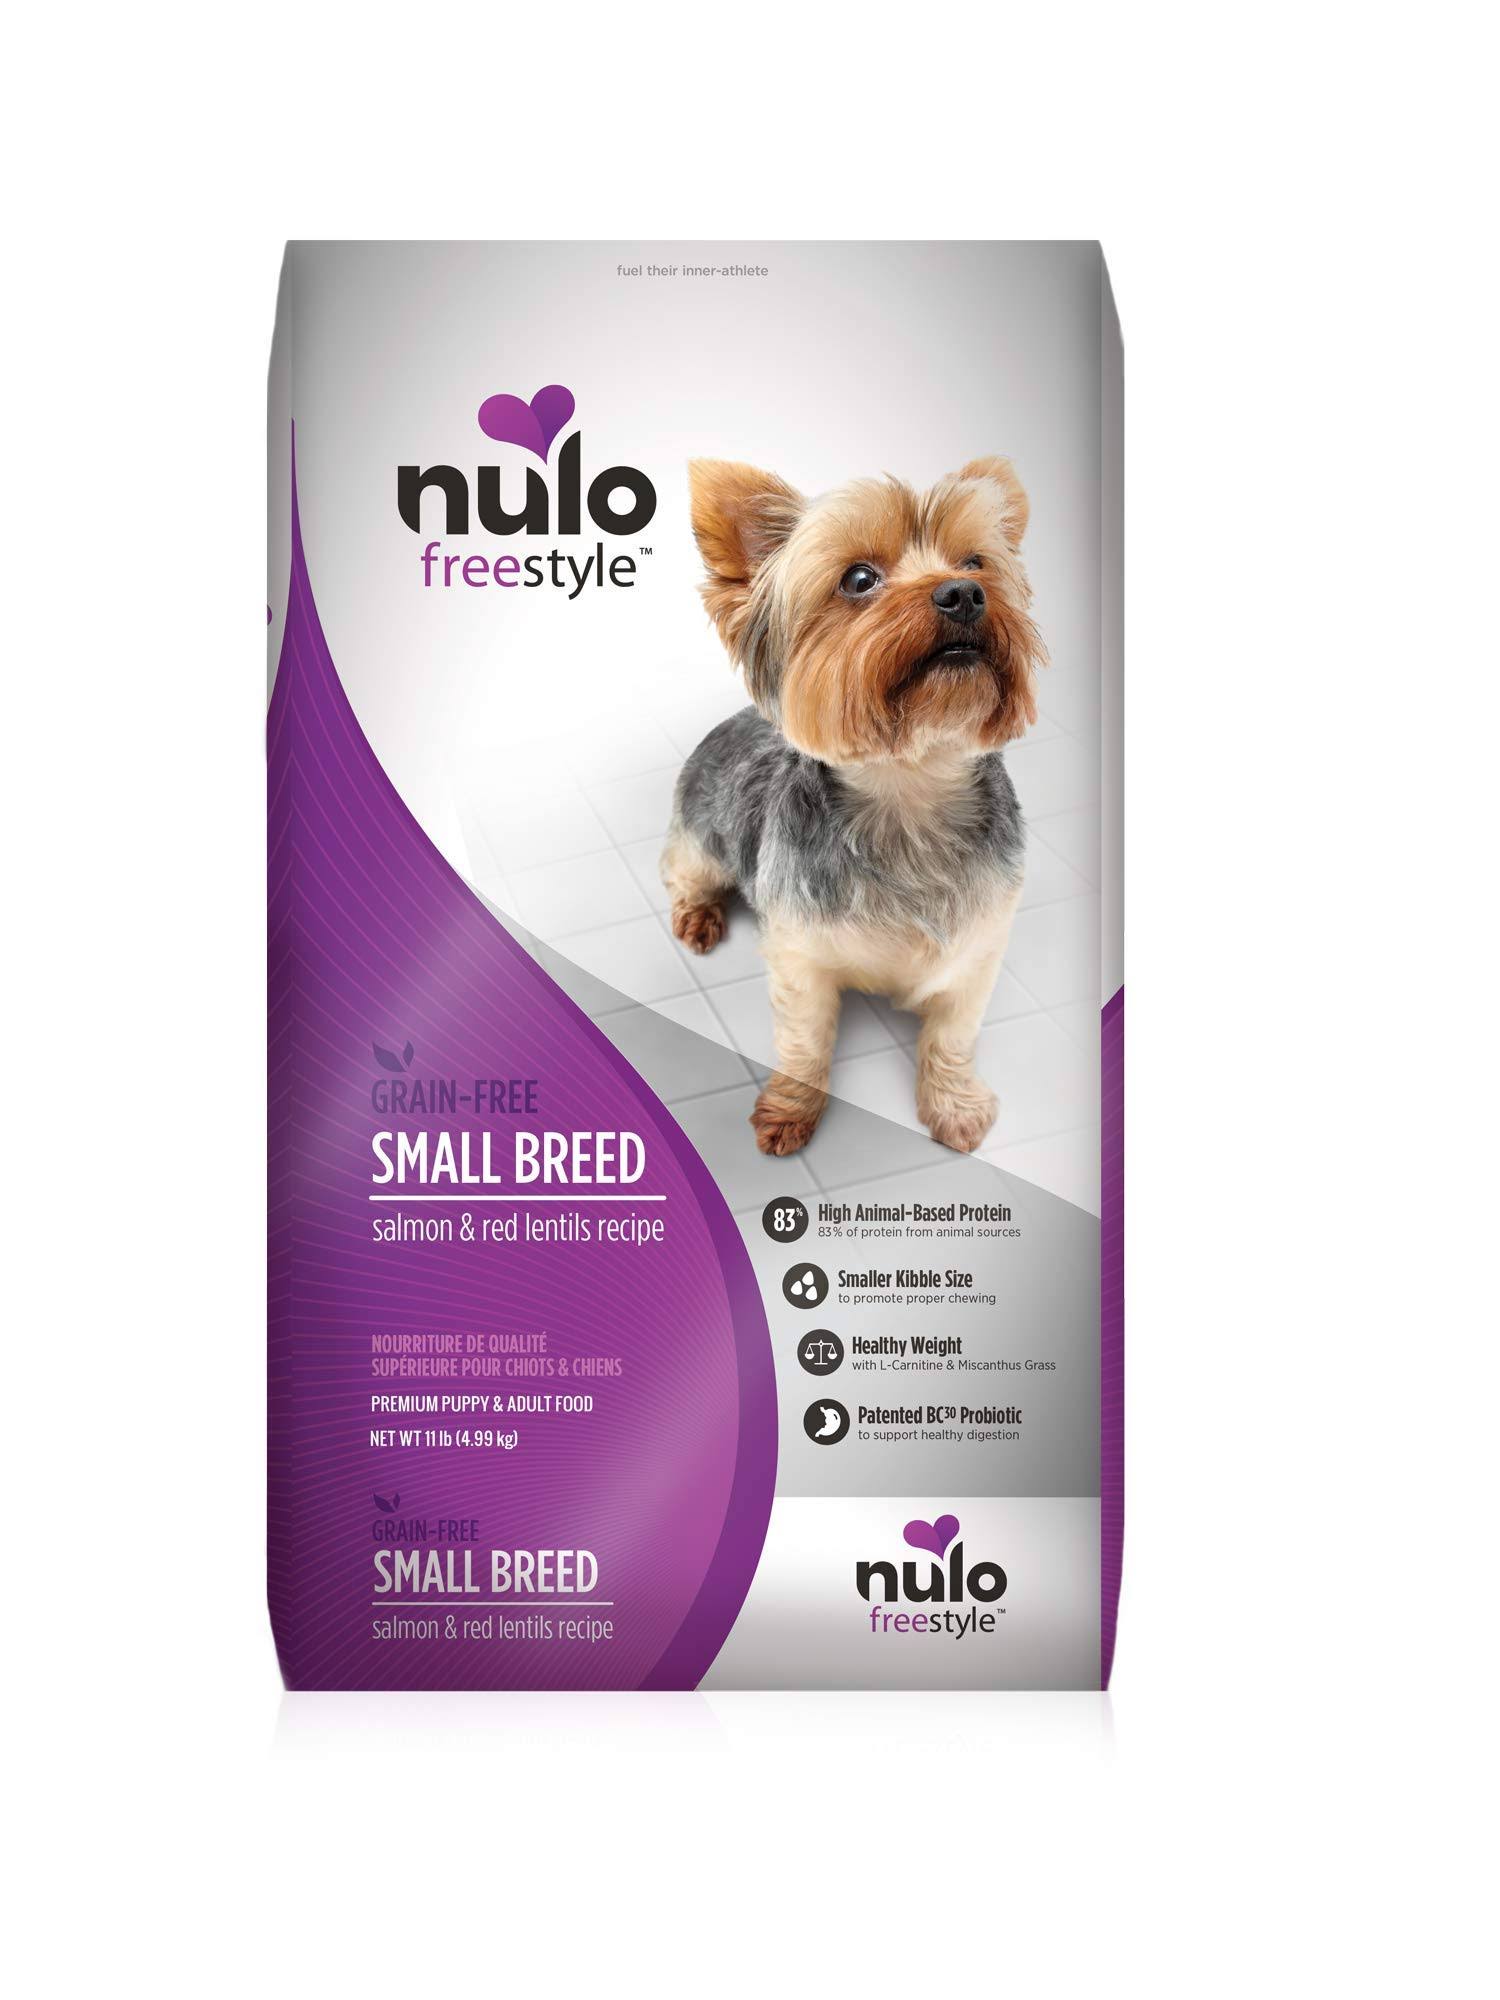 Nulo Dog Food - Small Breed, Salmon and Red Lentils Recipe